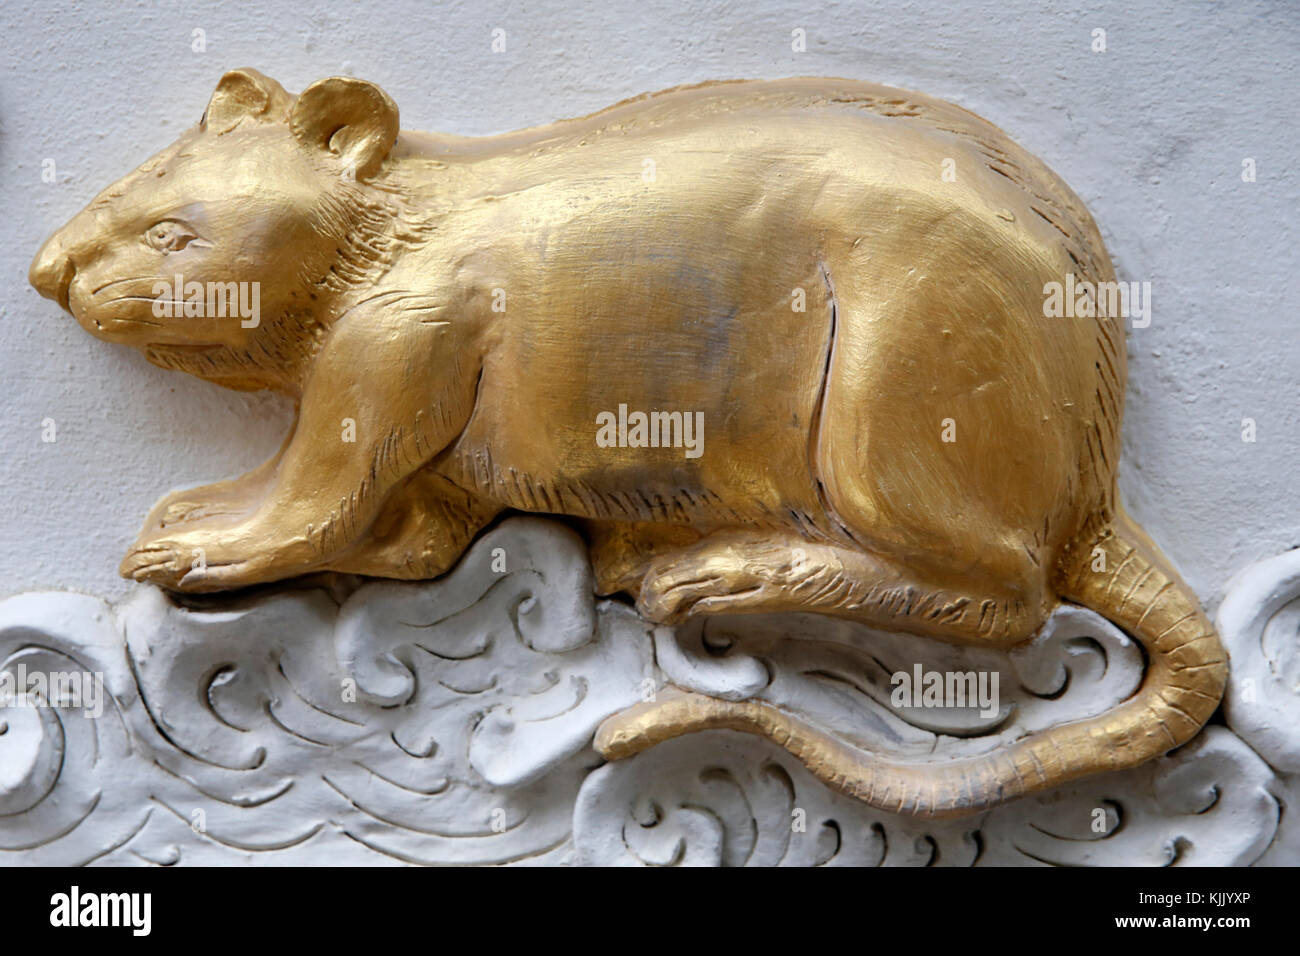 Chinese horoscope sign sculpture in Wat Chiang Them, Chiang Mai. Rat. Thailand. Stock Photo